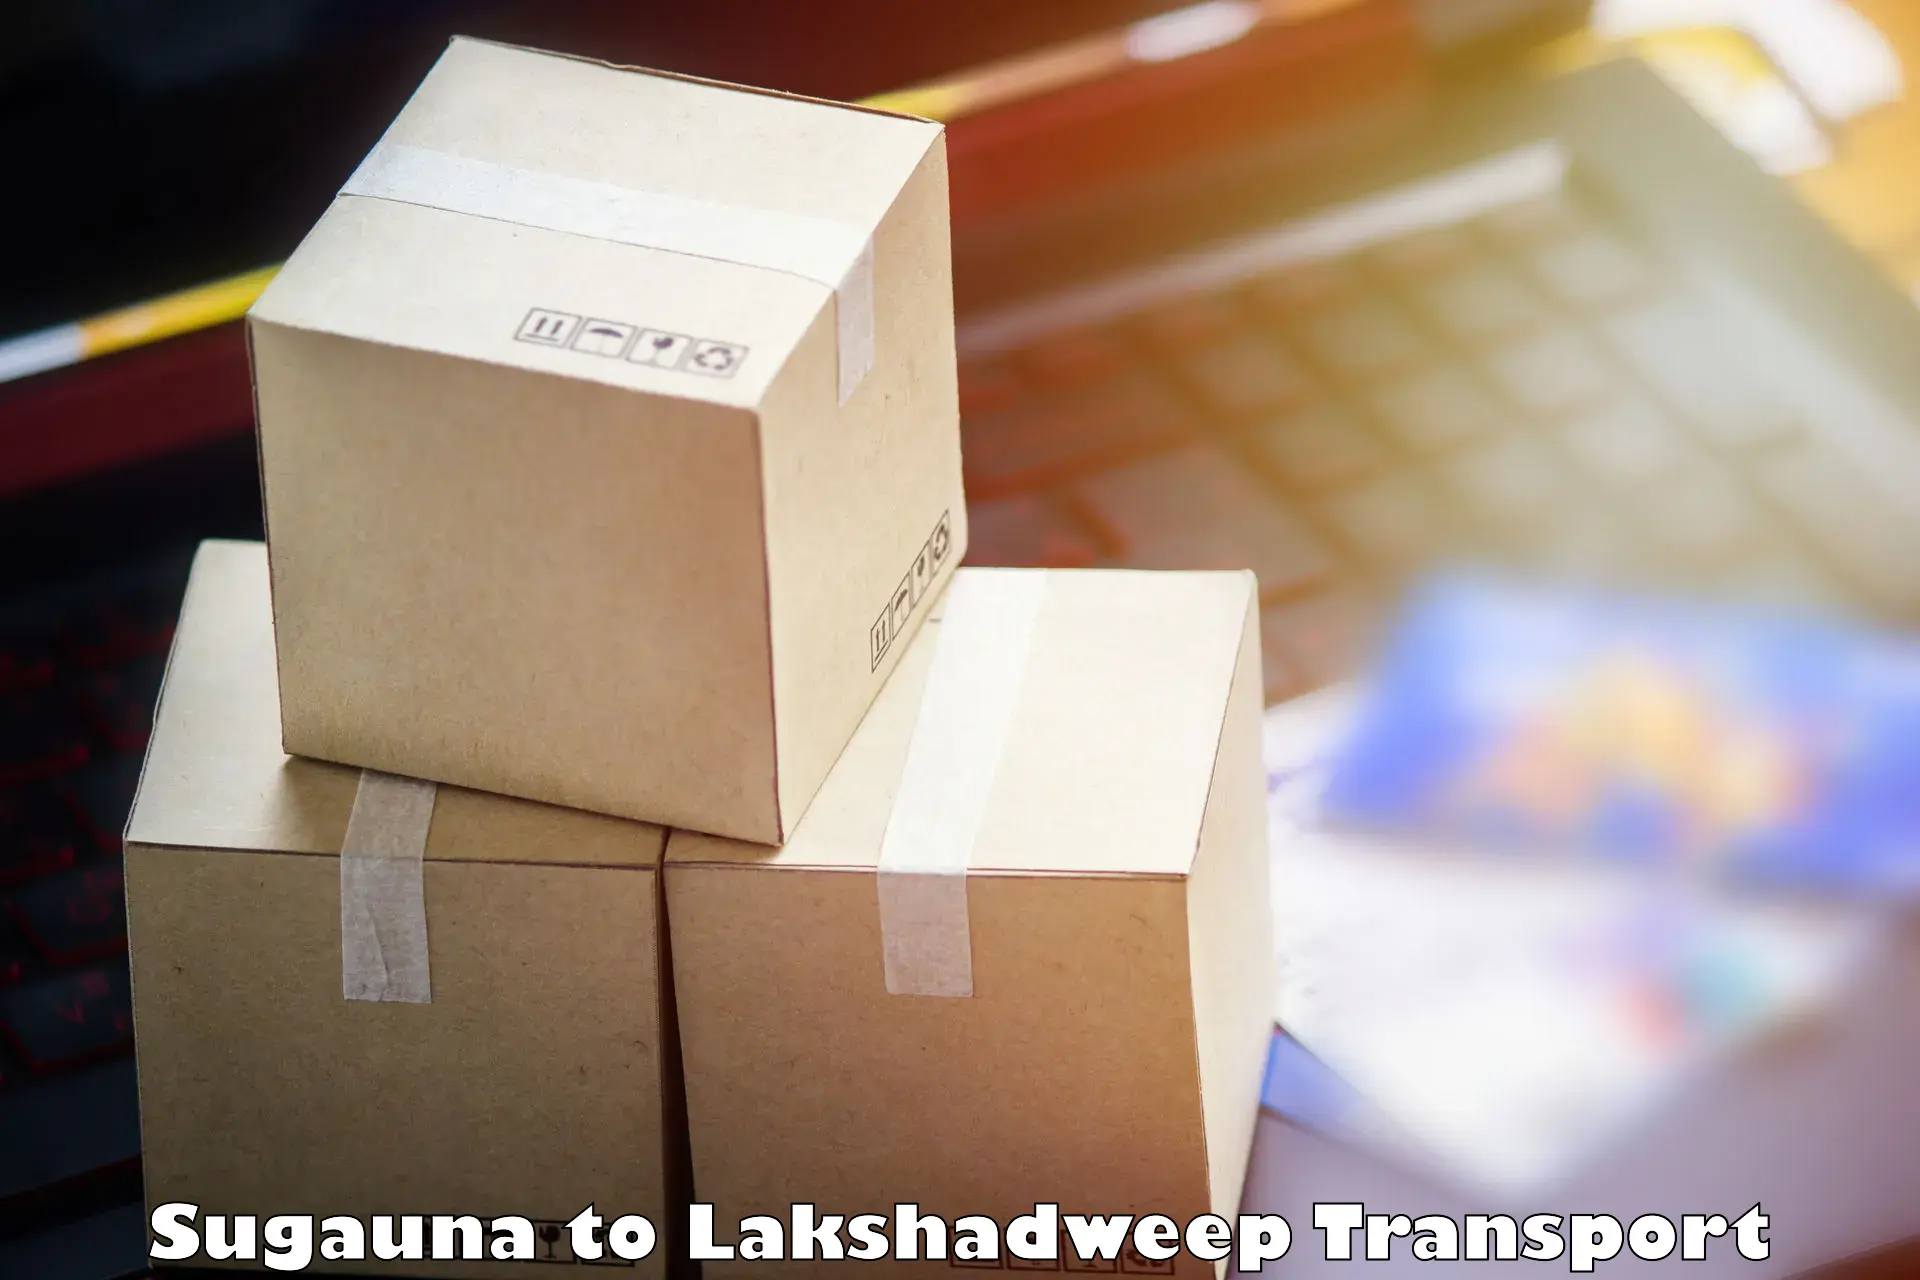 Road transport services in Sugauna to Lakshadweep